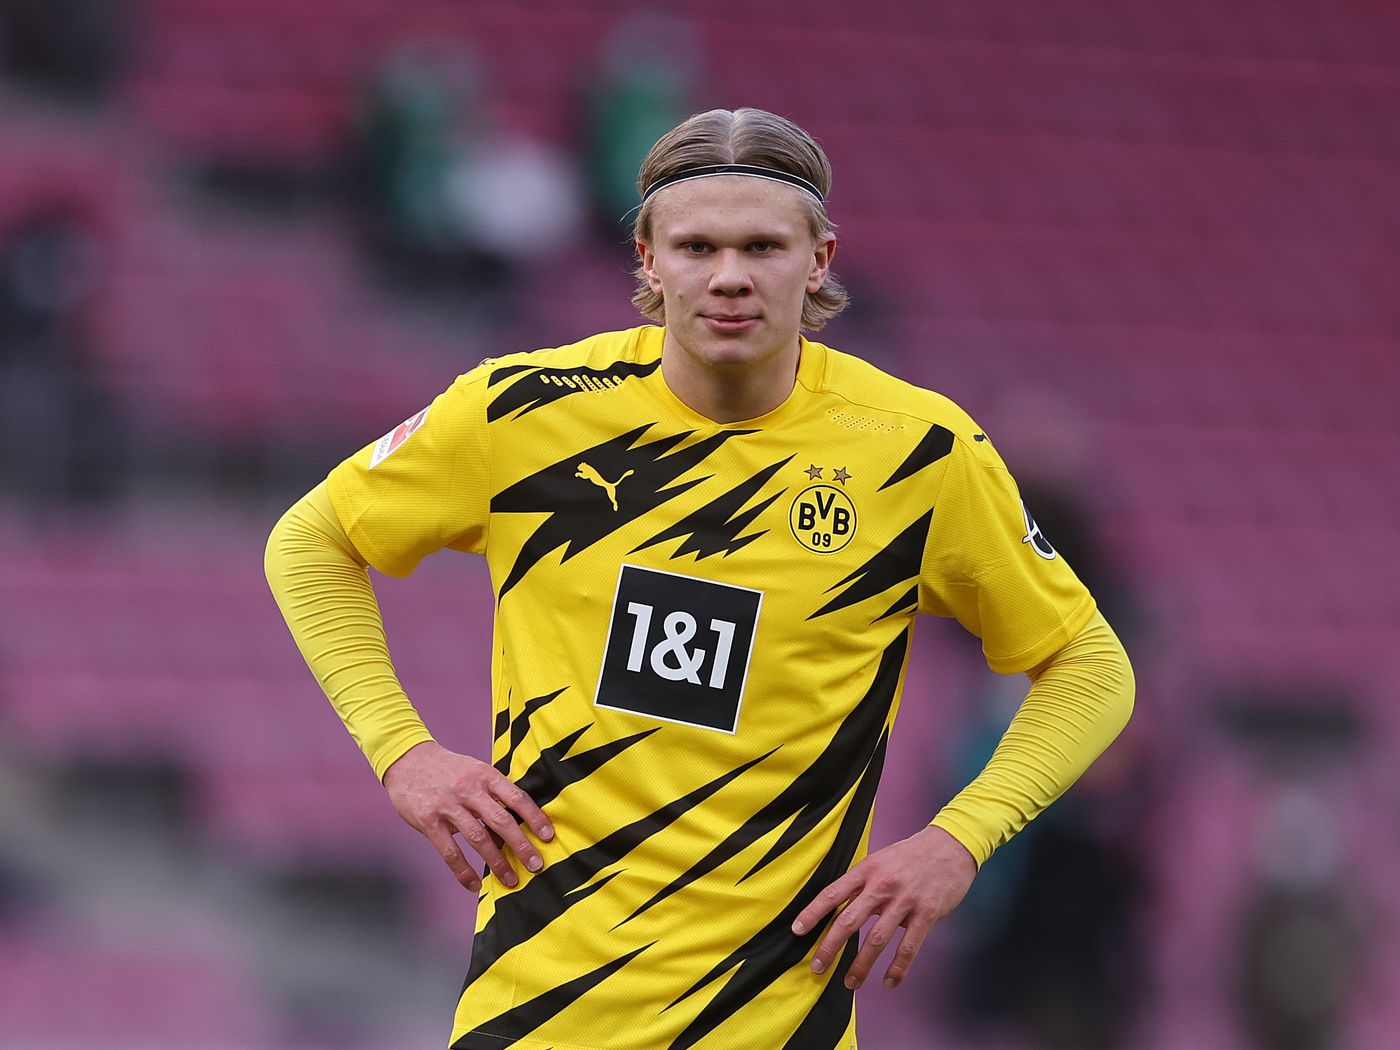 Erling Haaland ‘only wants’ Barcelona or Real Madrid